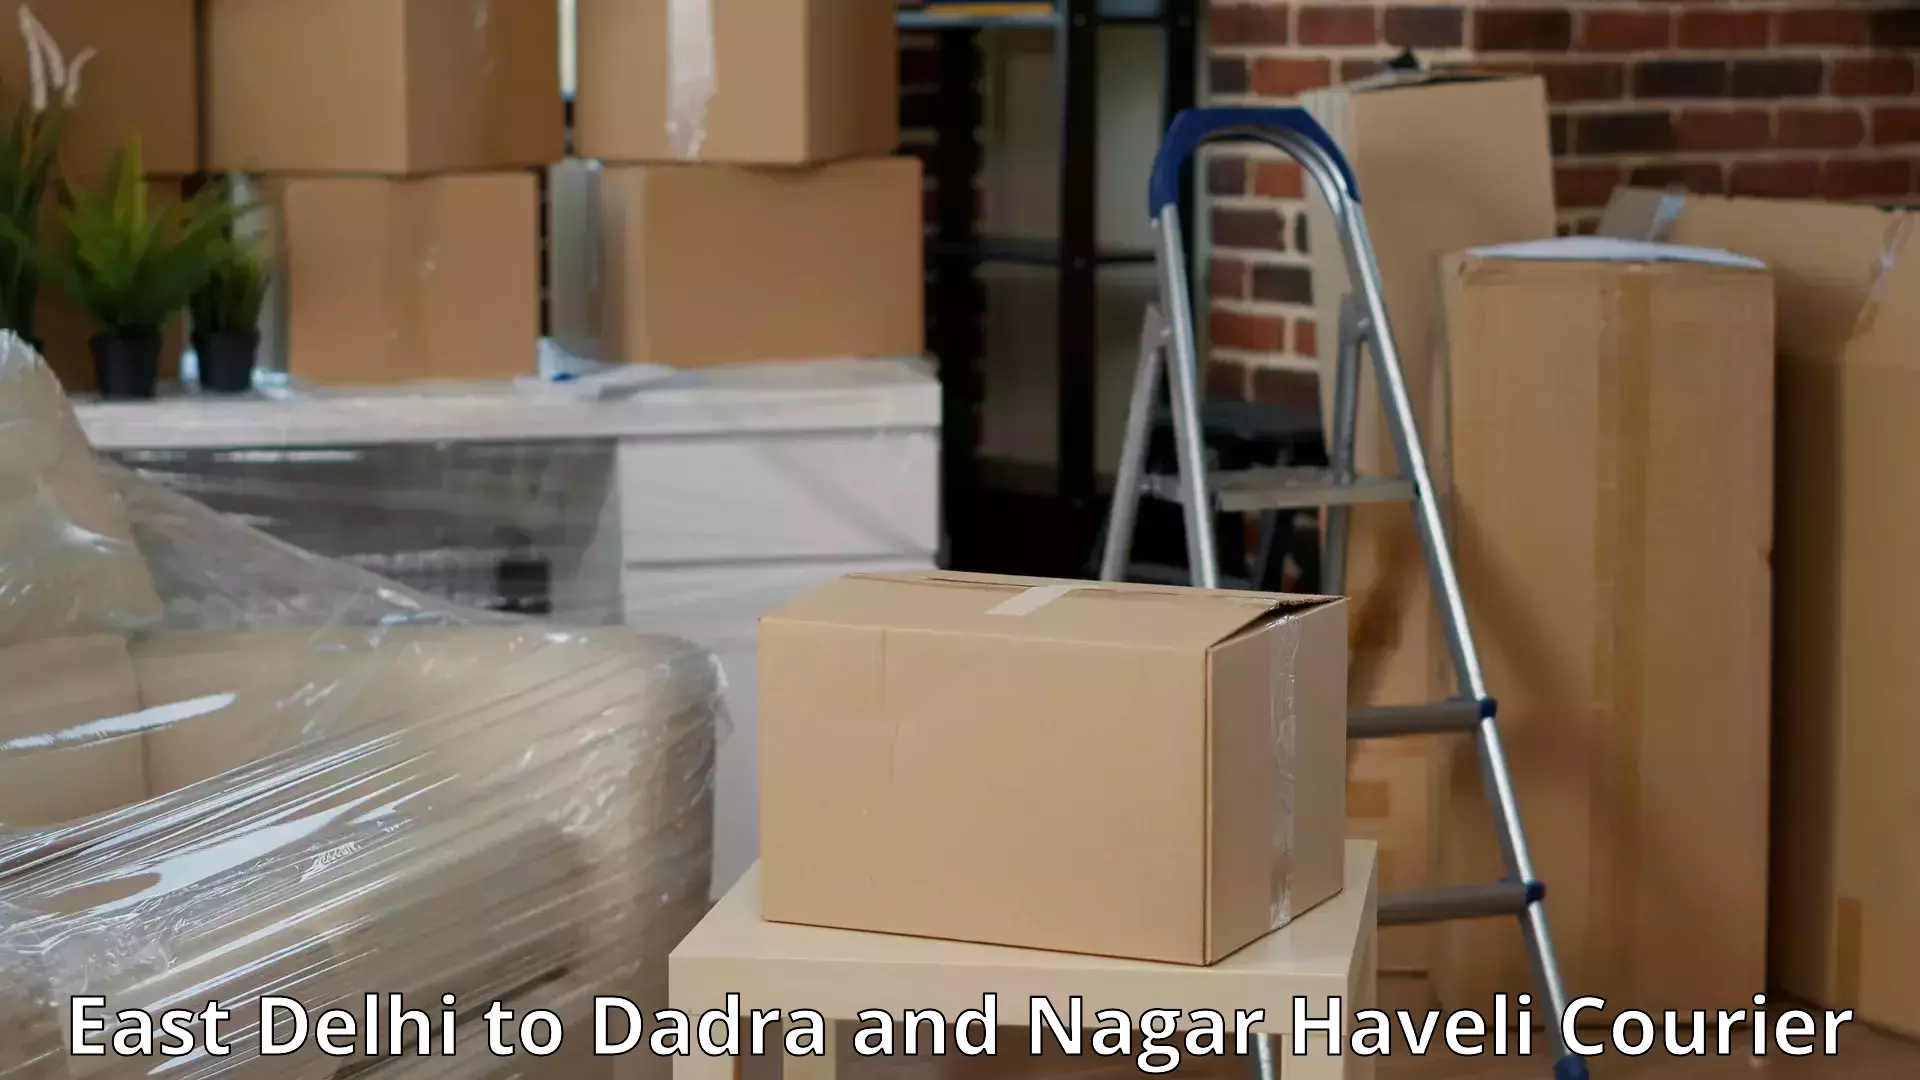 Quality relocation services East Delhi to Dadra and Nagar Haveli